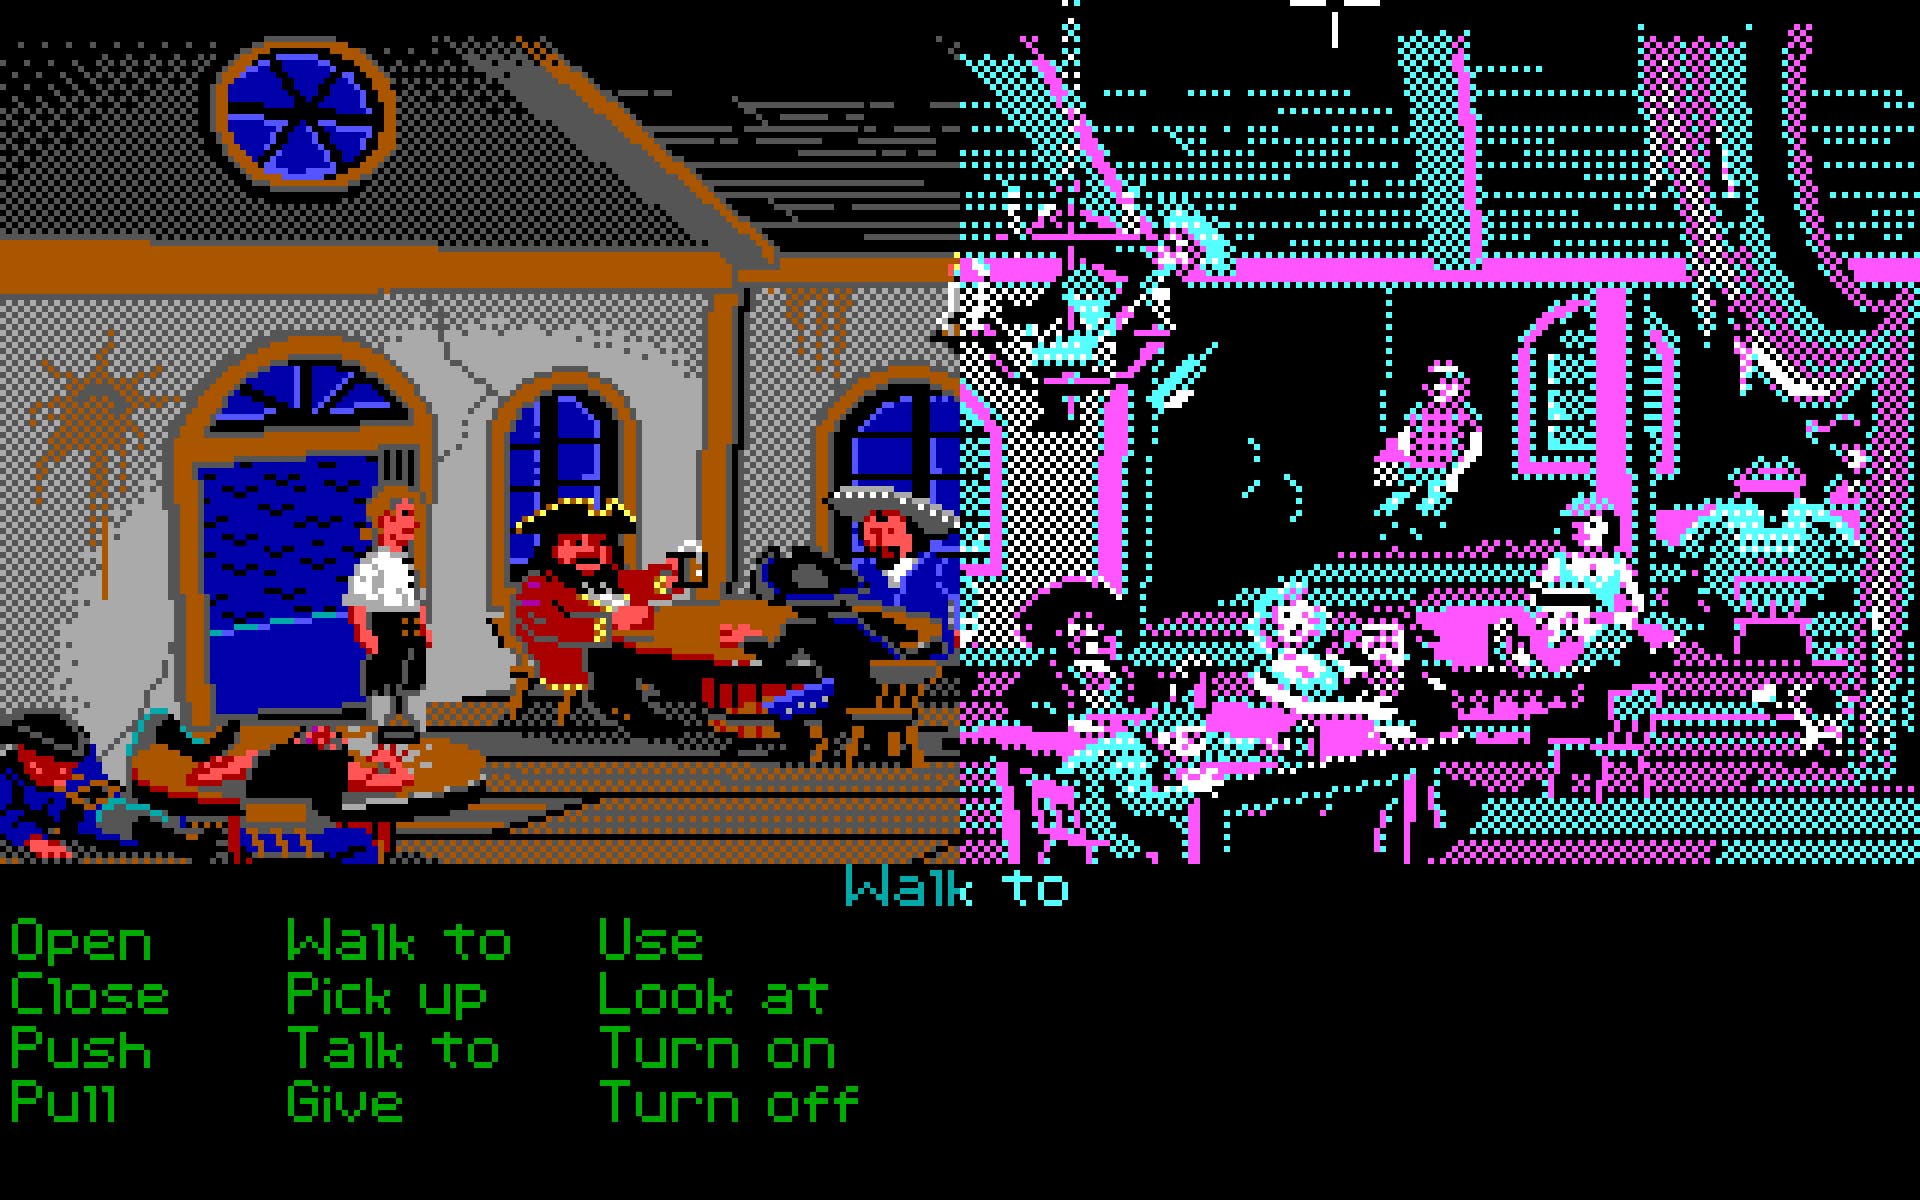 EGA graphics: The Secret of Monkey Island in EGA on the left and CGA on the right